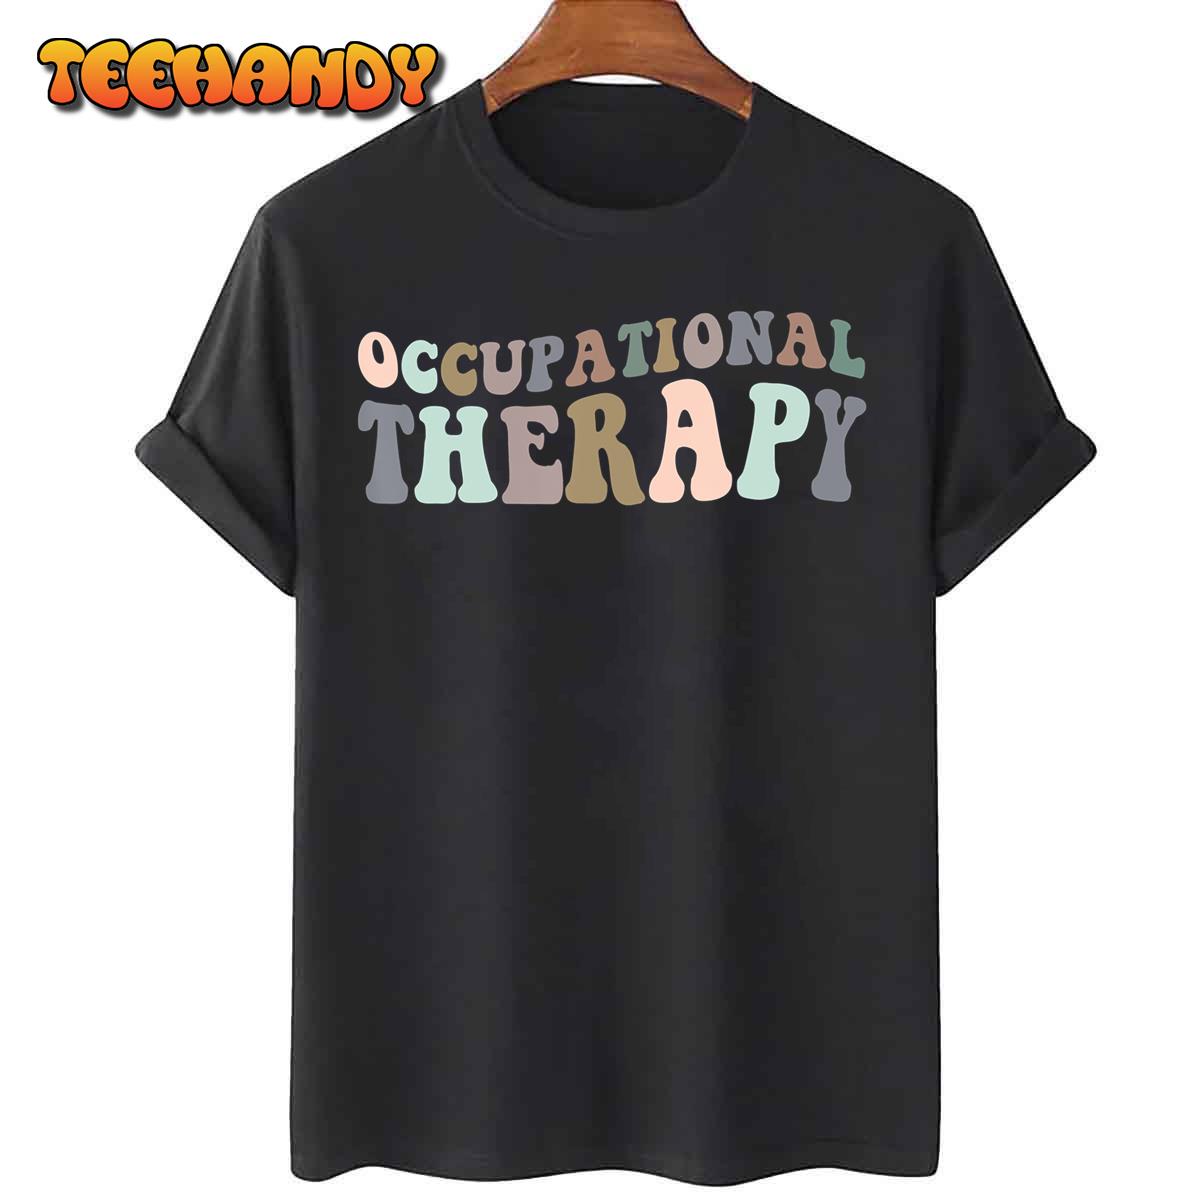 Occupational Therapy Therapist ot gifts men women students T-Shirt